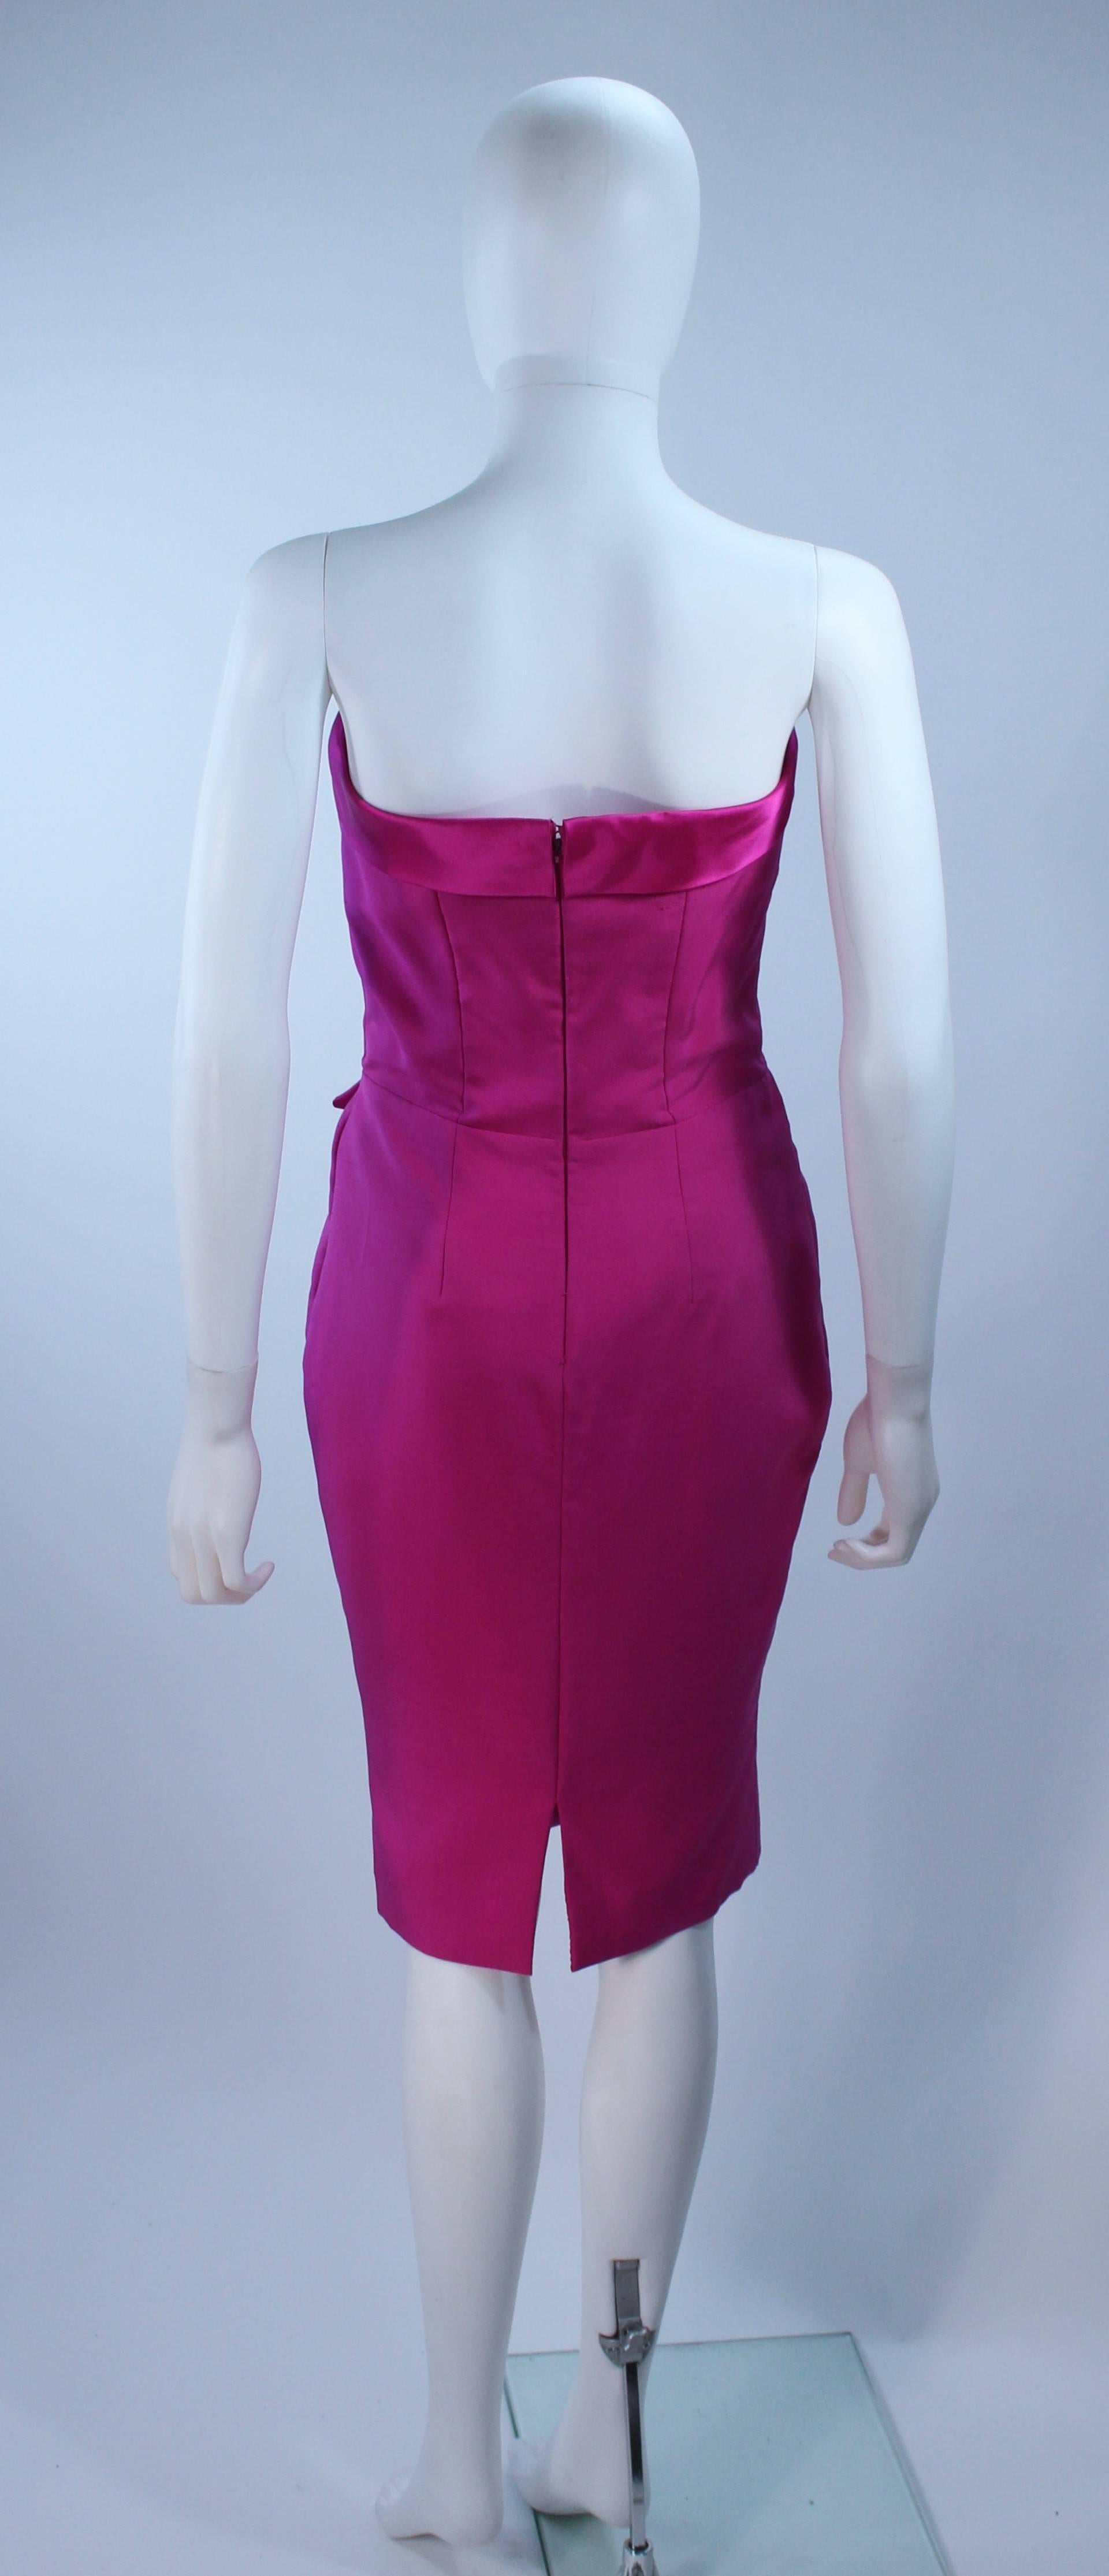 ELIZABETH MASON COUTURE Magenta Silk Cocktail Dress Made to Order For Sale 2